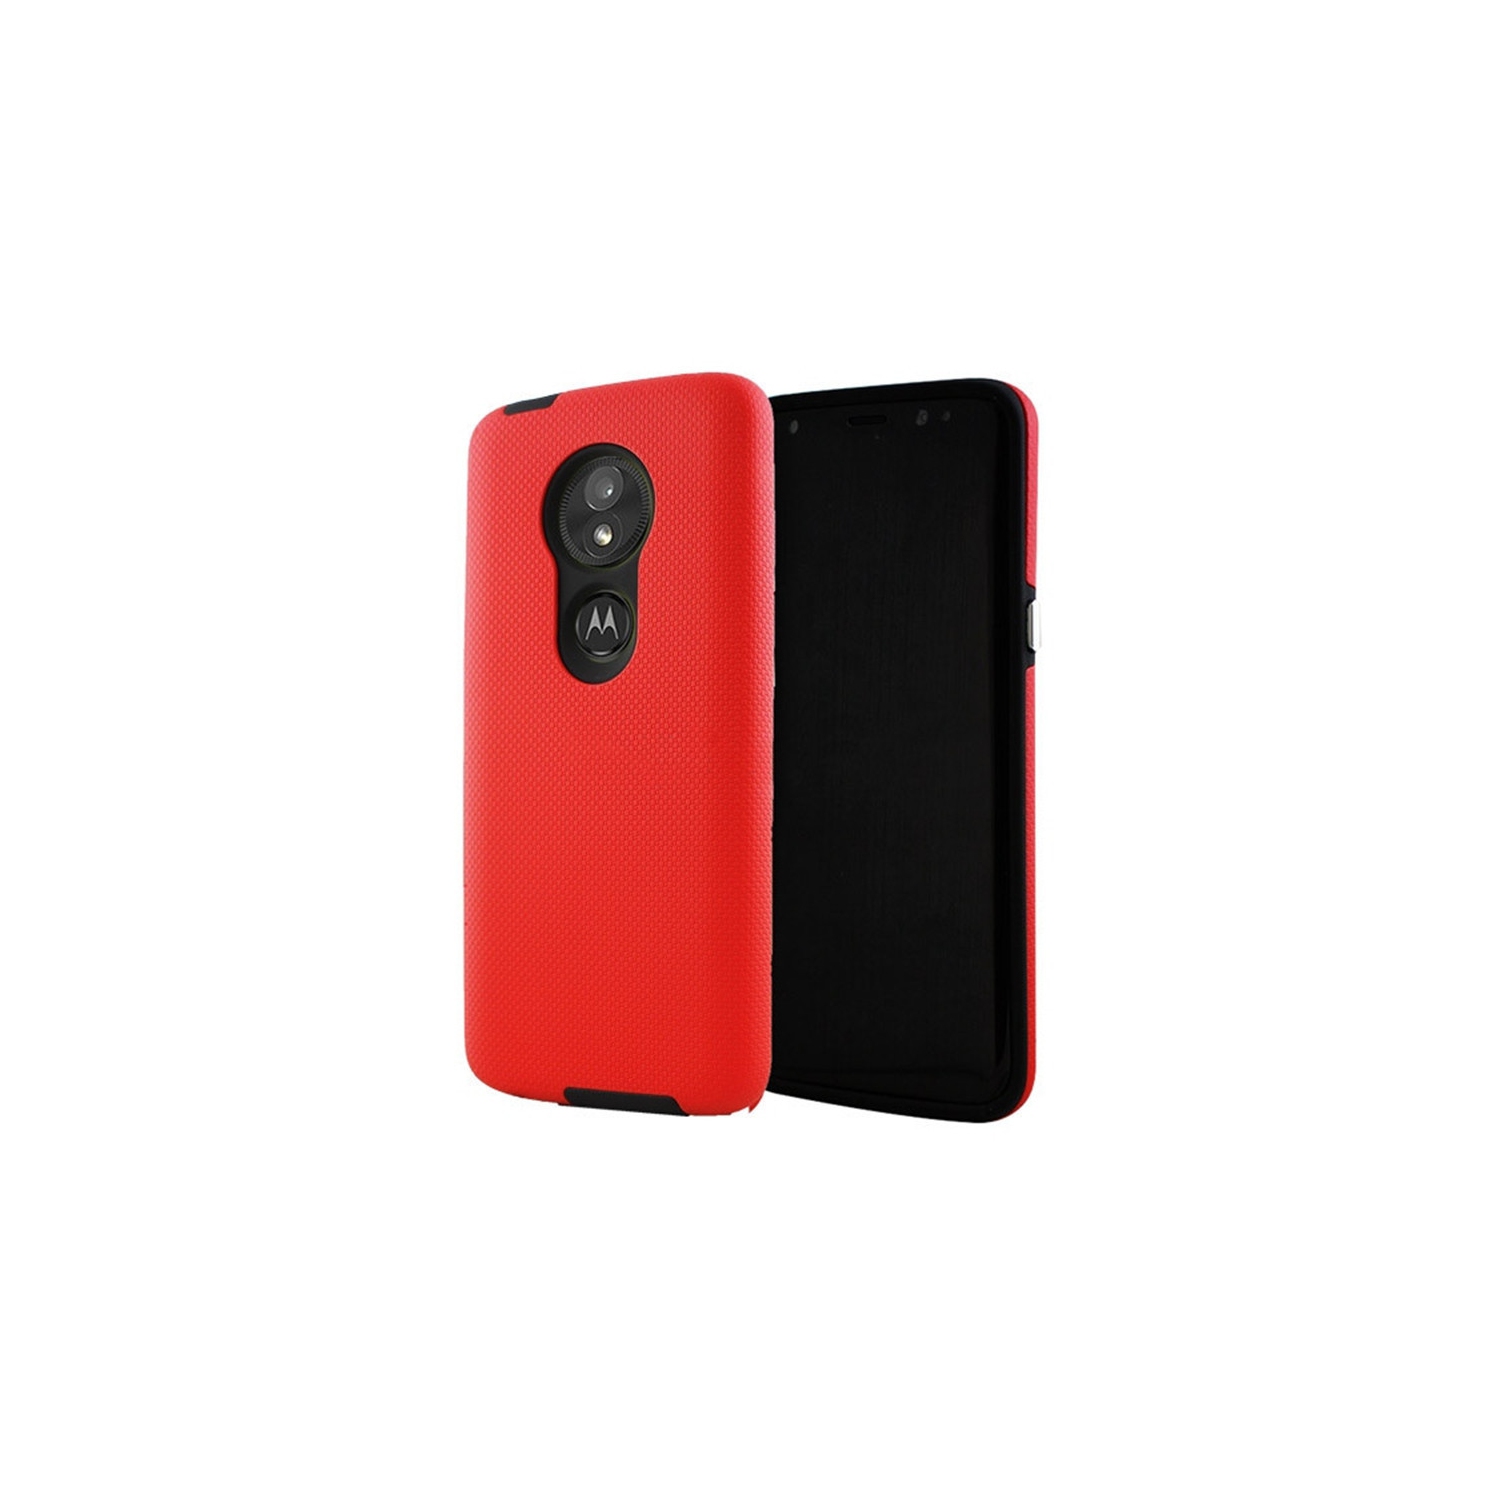 【CSmart】 Slim Fitted Hybrid Hard PC Shell Shockproof Scratch Resistant Case Cover for Motorola Moto E5 Play, Red